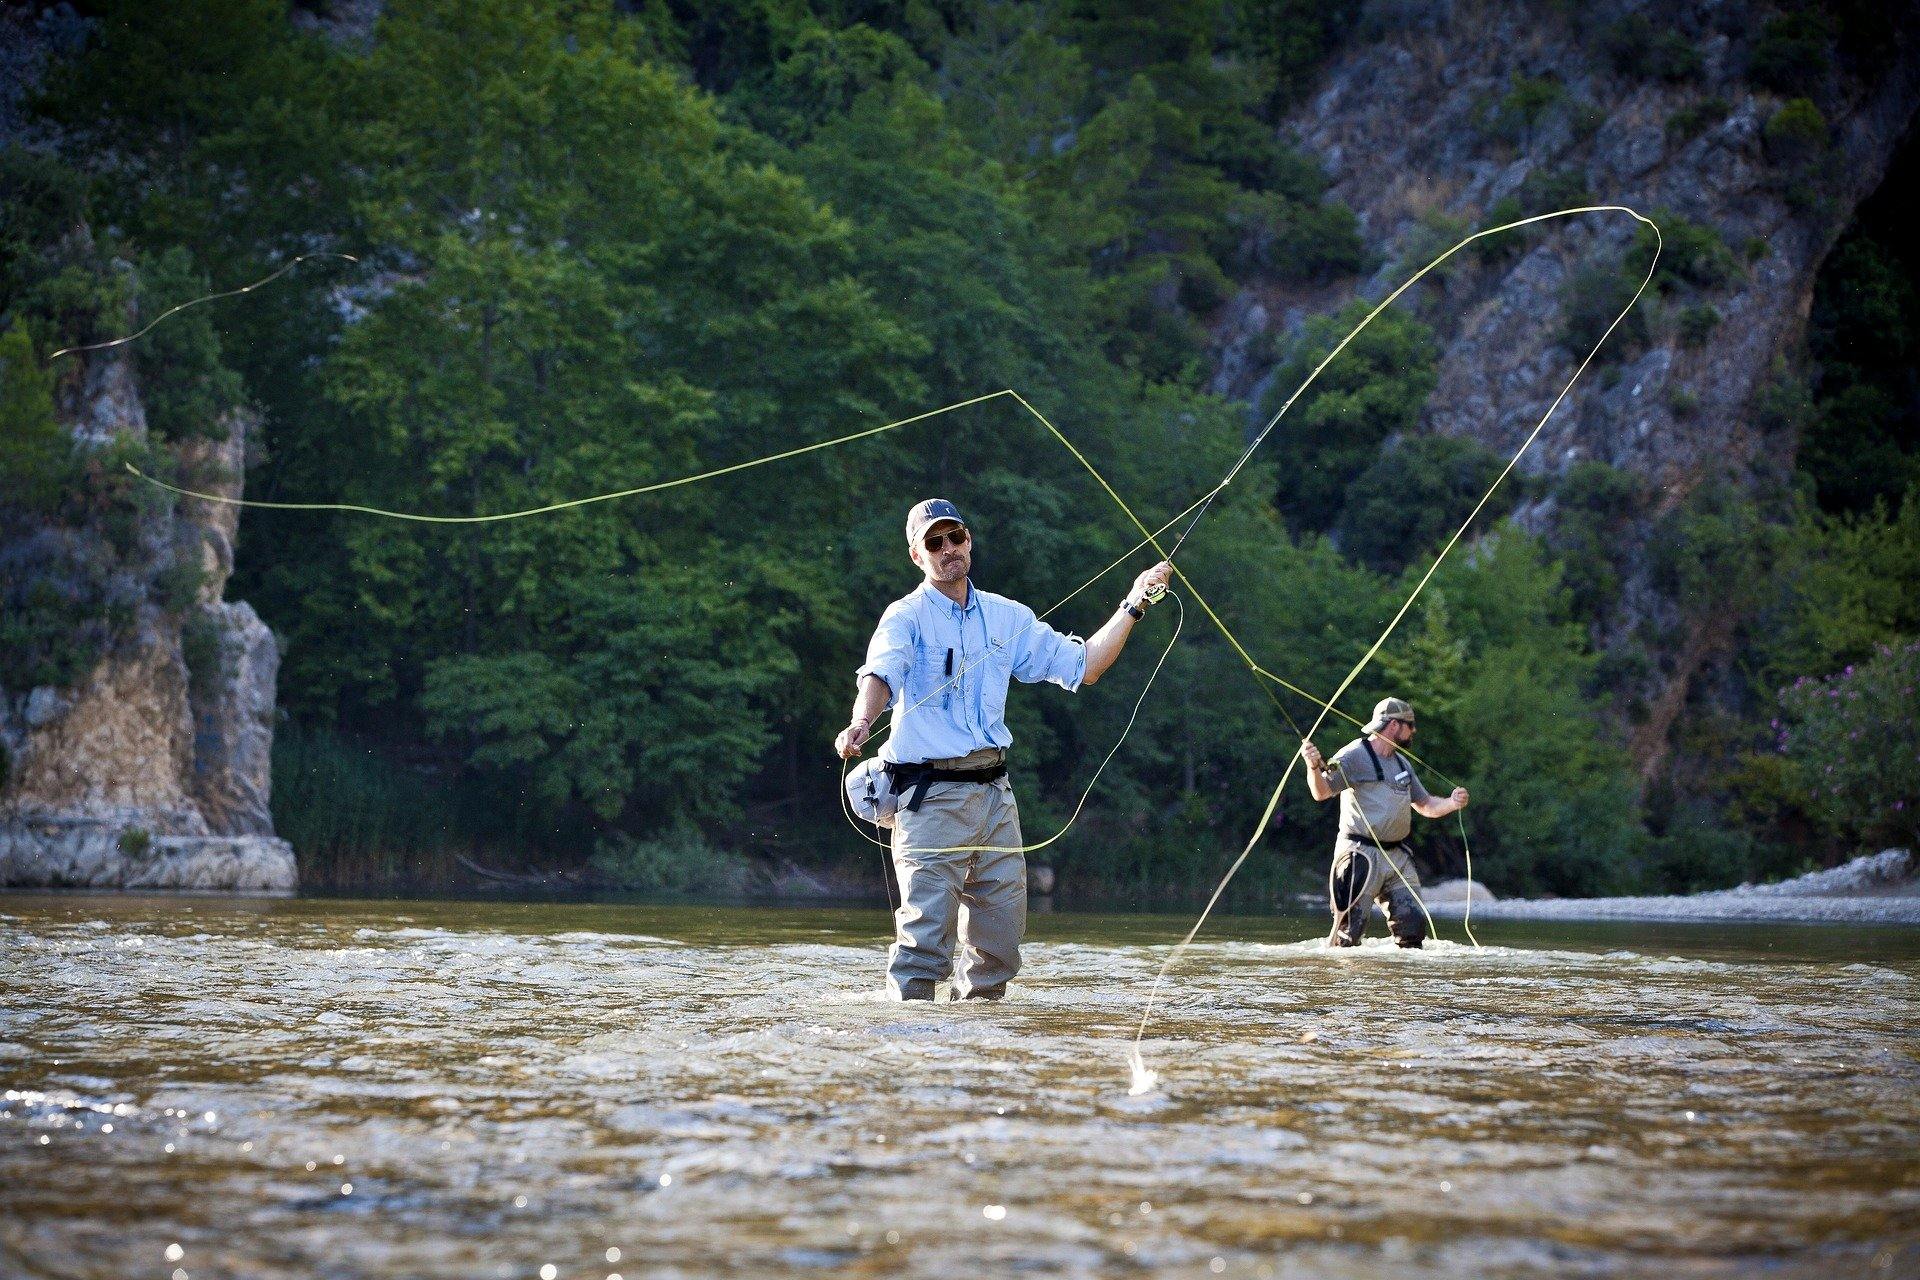 The Sport of Fly Fishing – A Very Different Approach